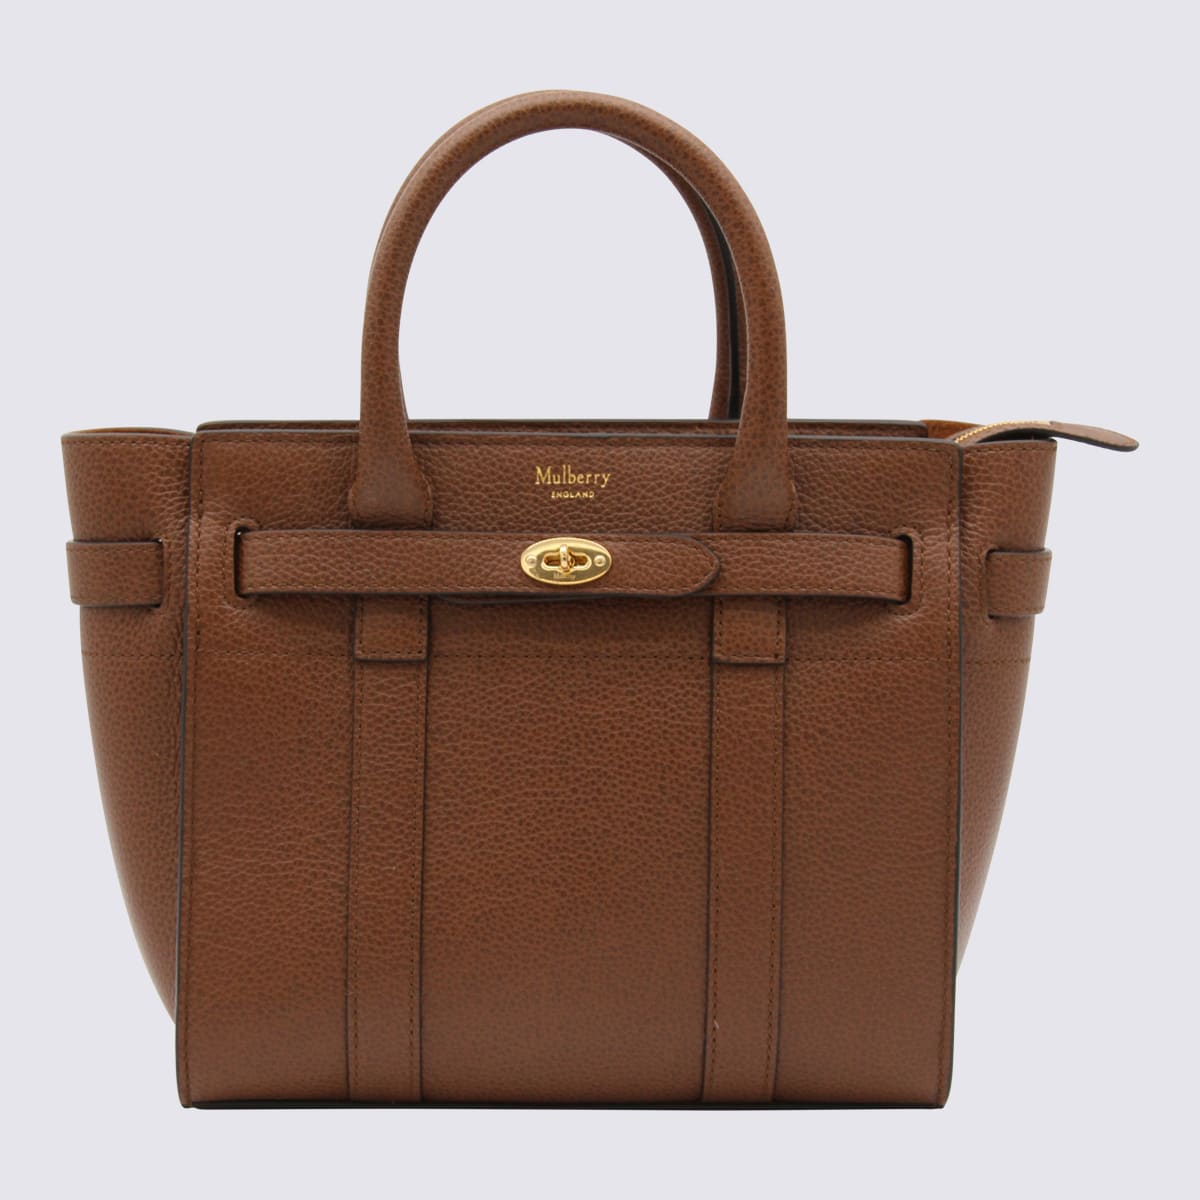 MULBERRY BROWN LEATHER BAYSWATER HANDLE BAG